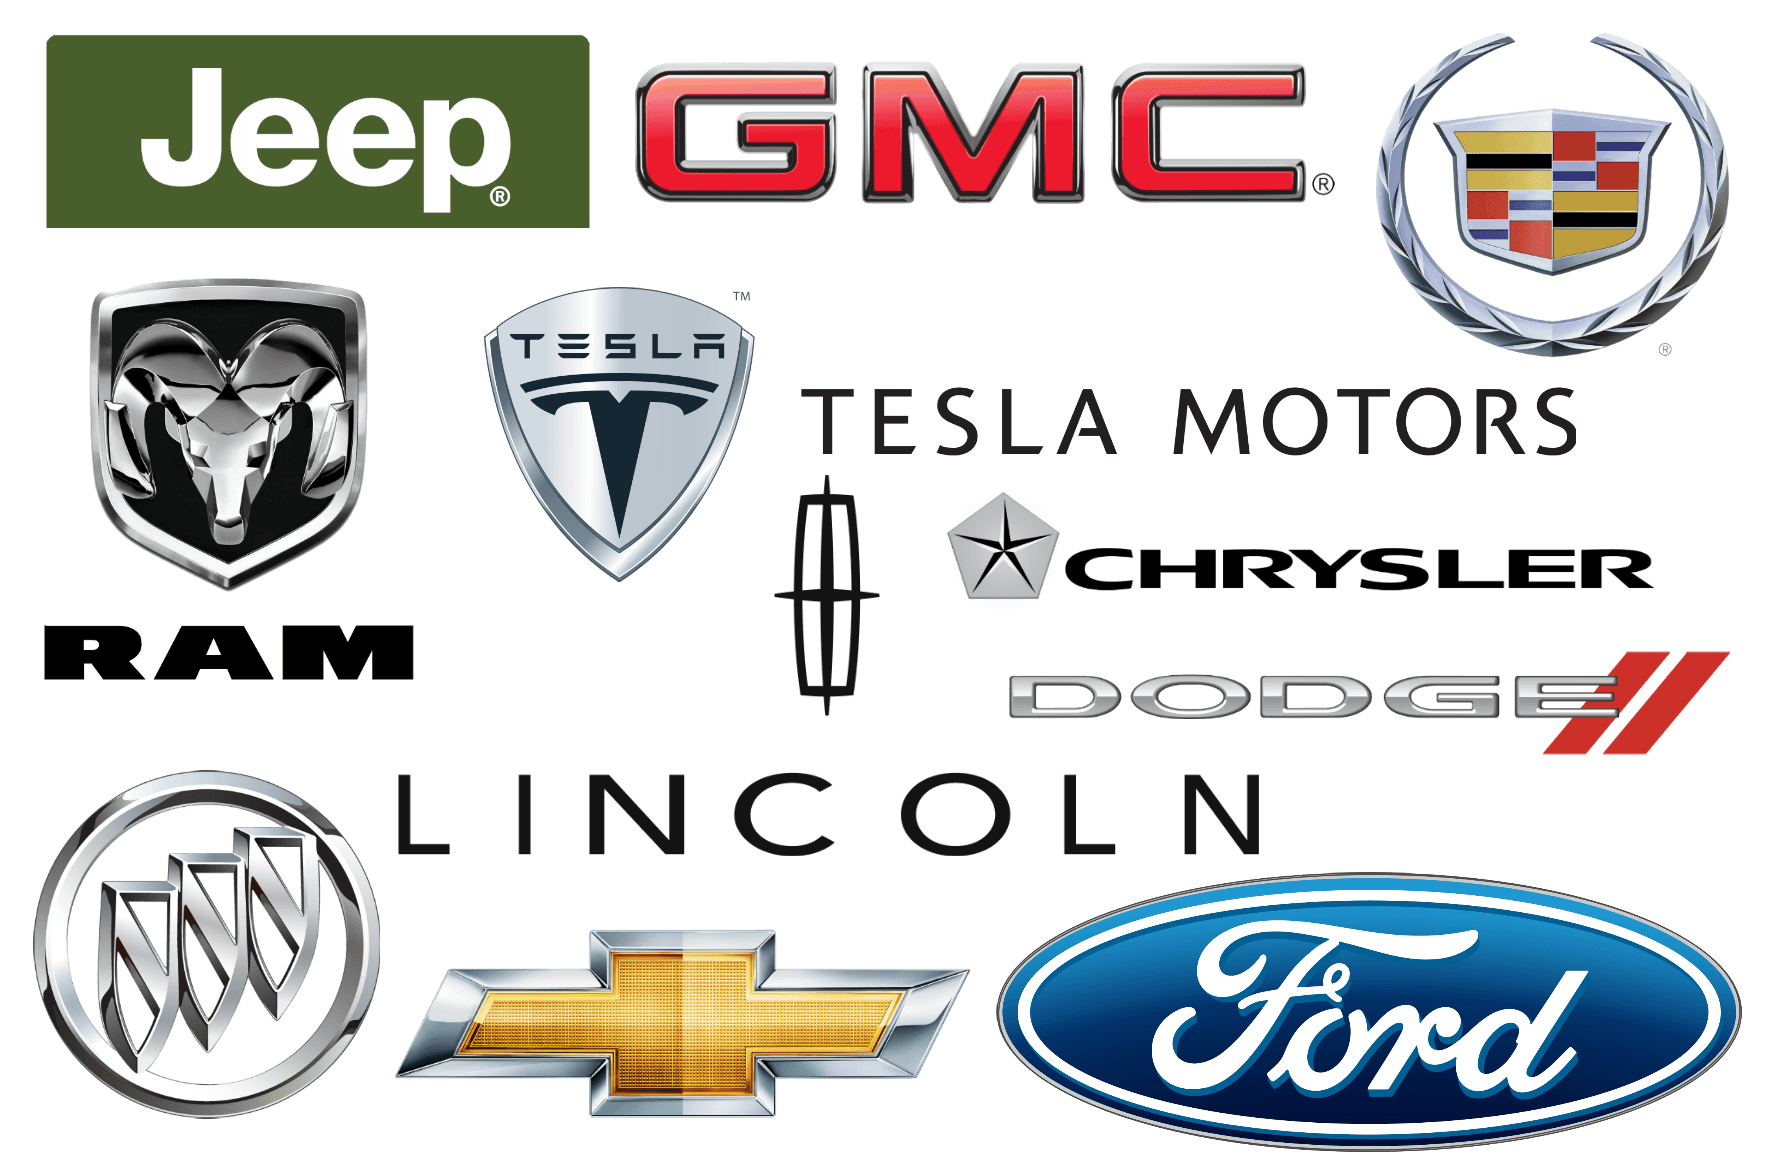 Uncommon Car Logo - American Car Brands, Companies and Manufacturers | Car Brand Names.com